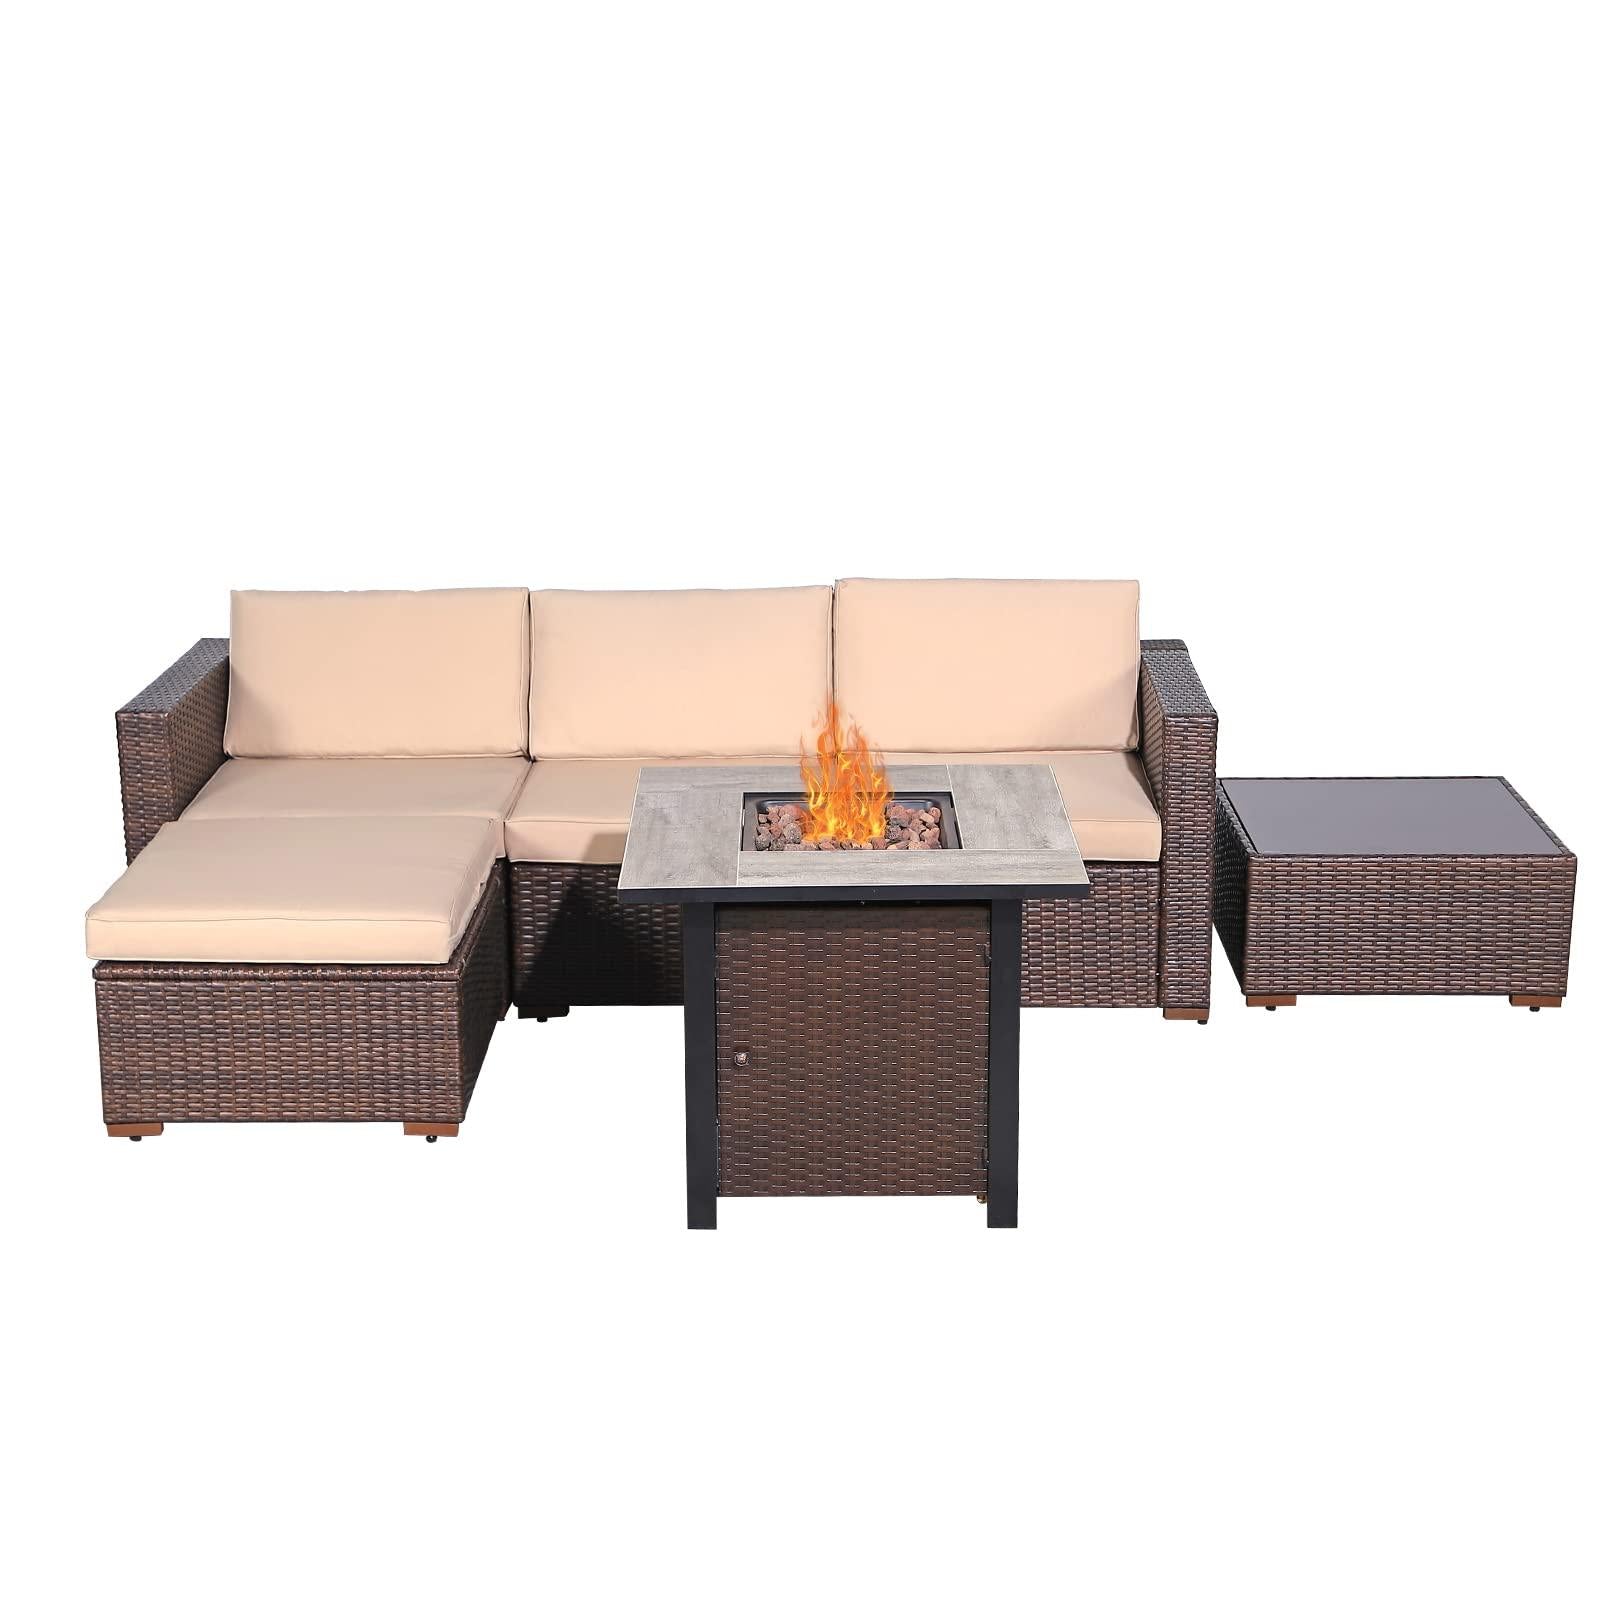 6-pc. Patio Furniture Set with Gas Fire Pit Table china